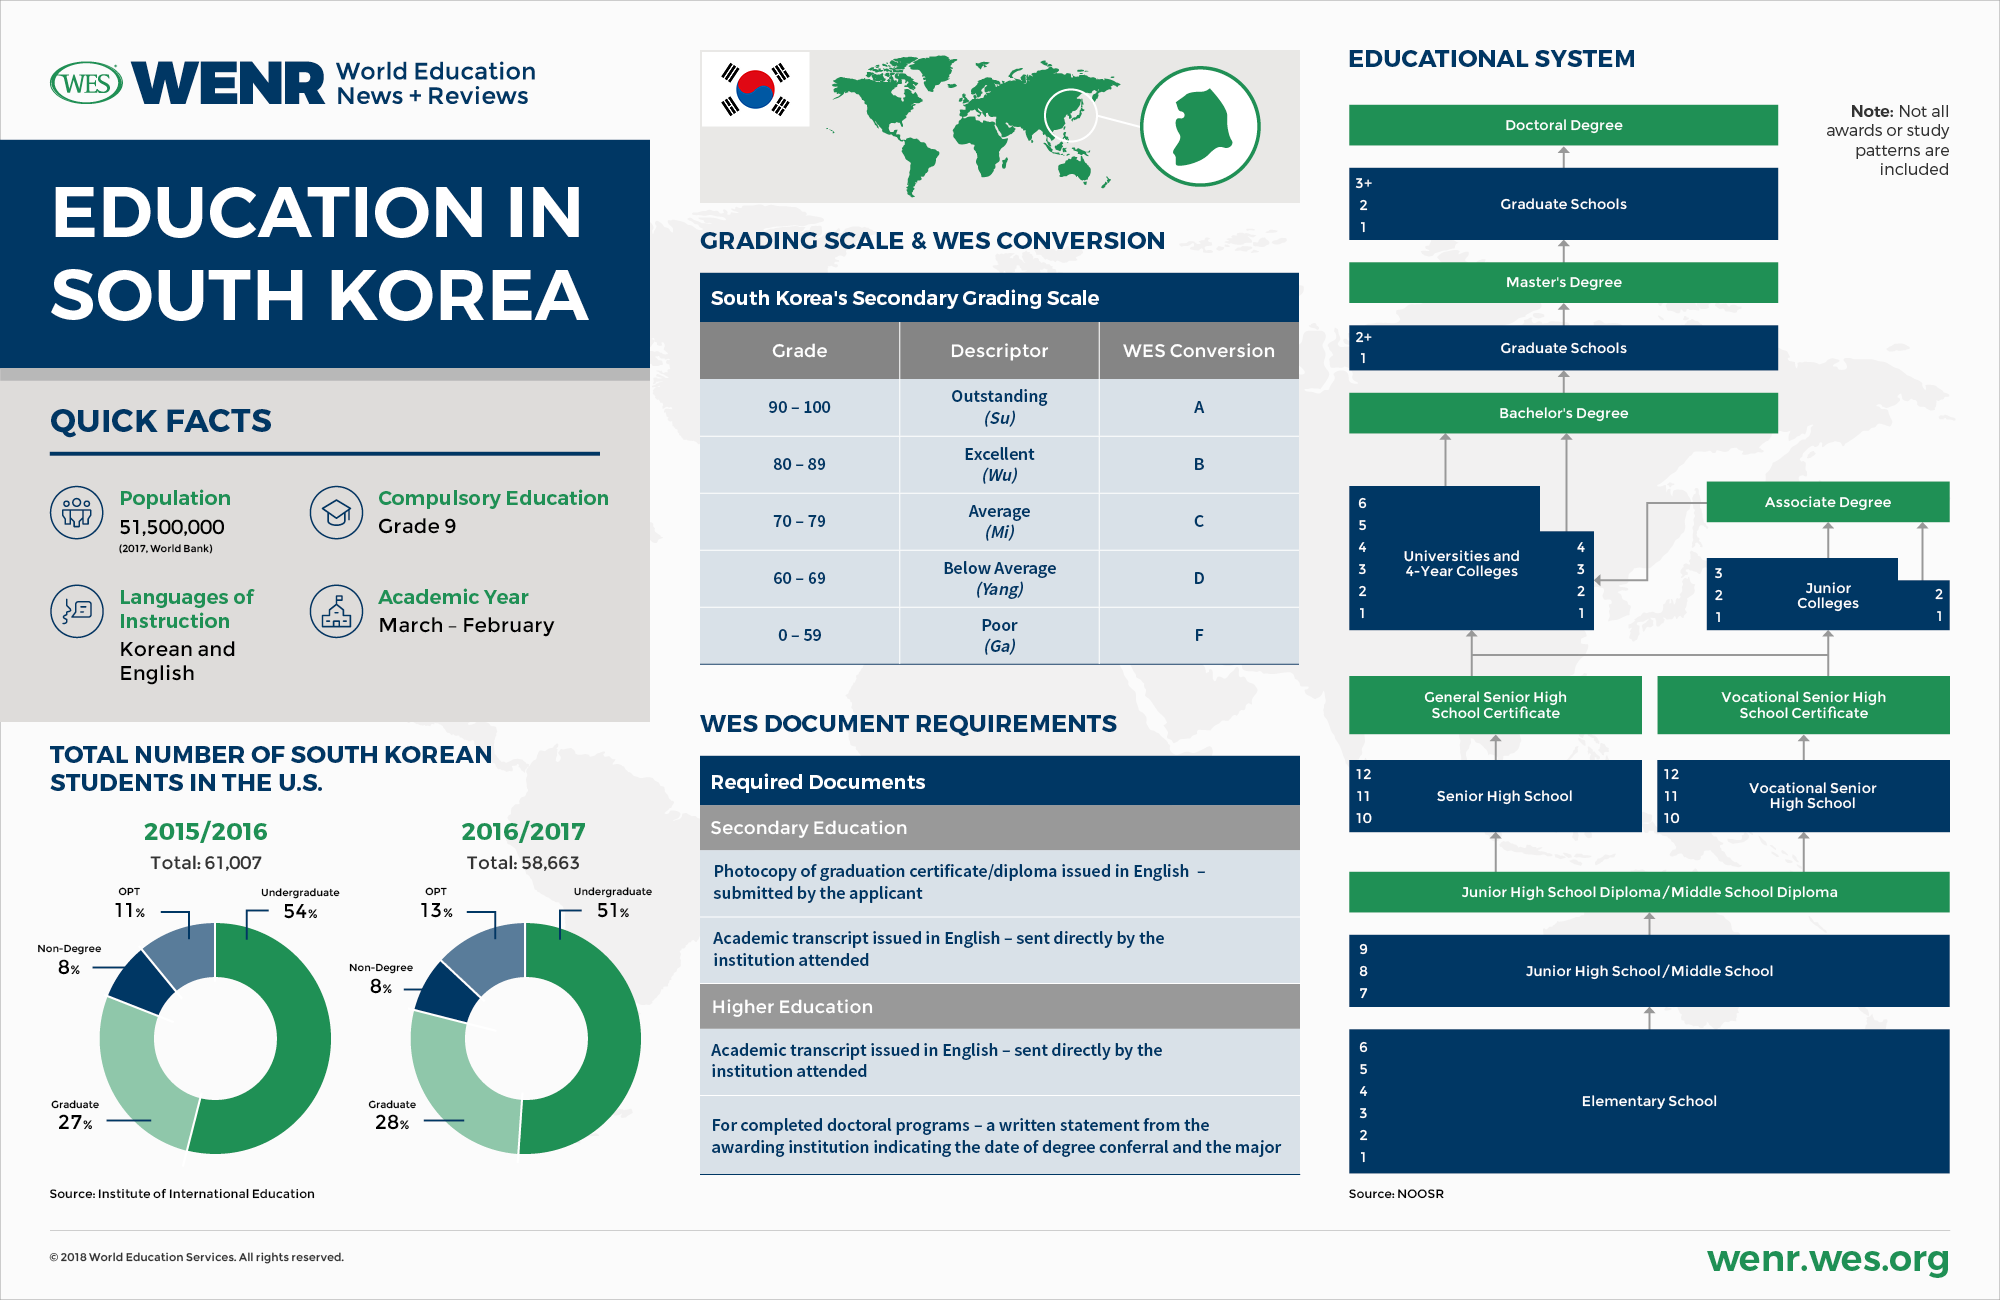 An infographic with fast facts on South Korea's educational system and international student mobility